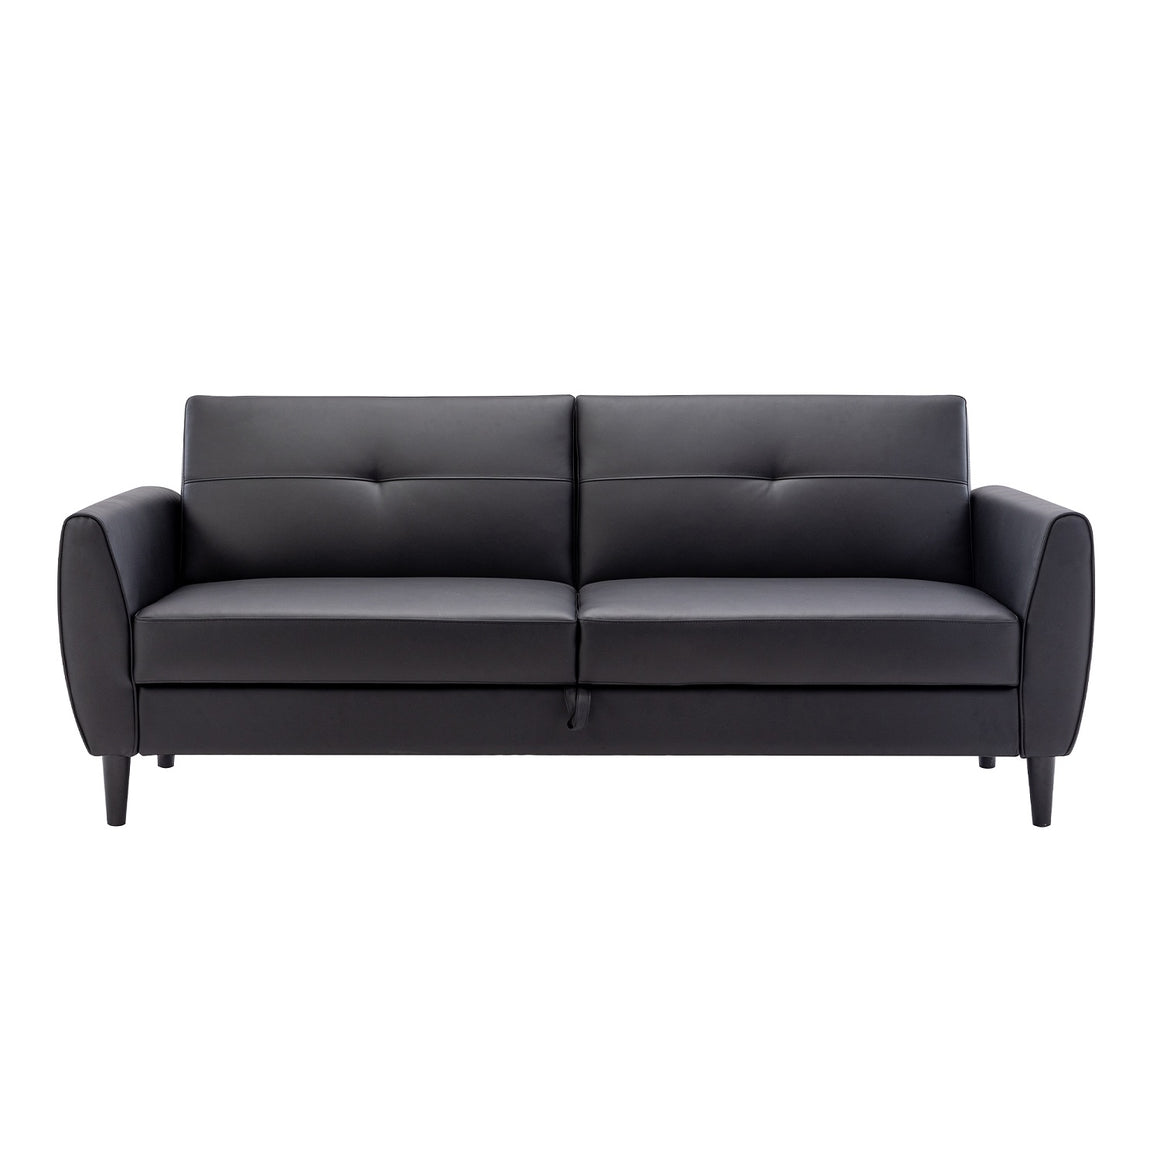 River Quinn Modern Convertible Sofa Bed with Storage Box in Graphite Black